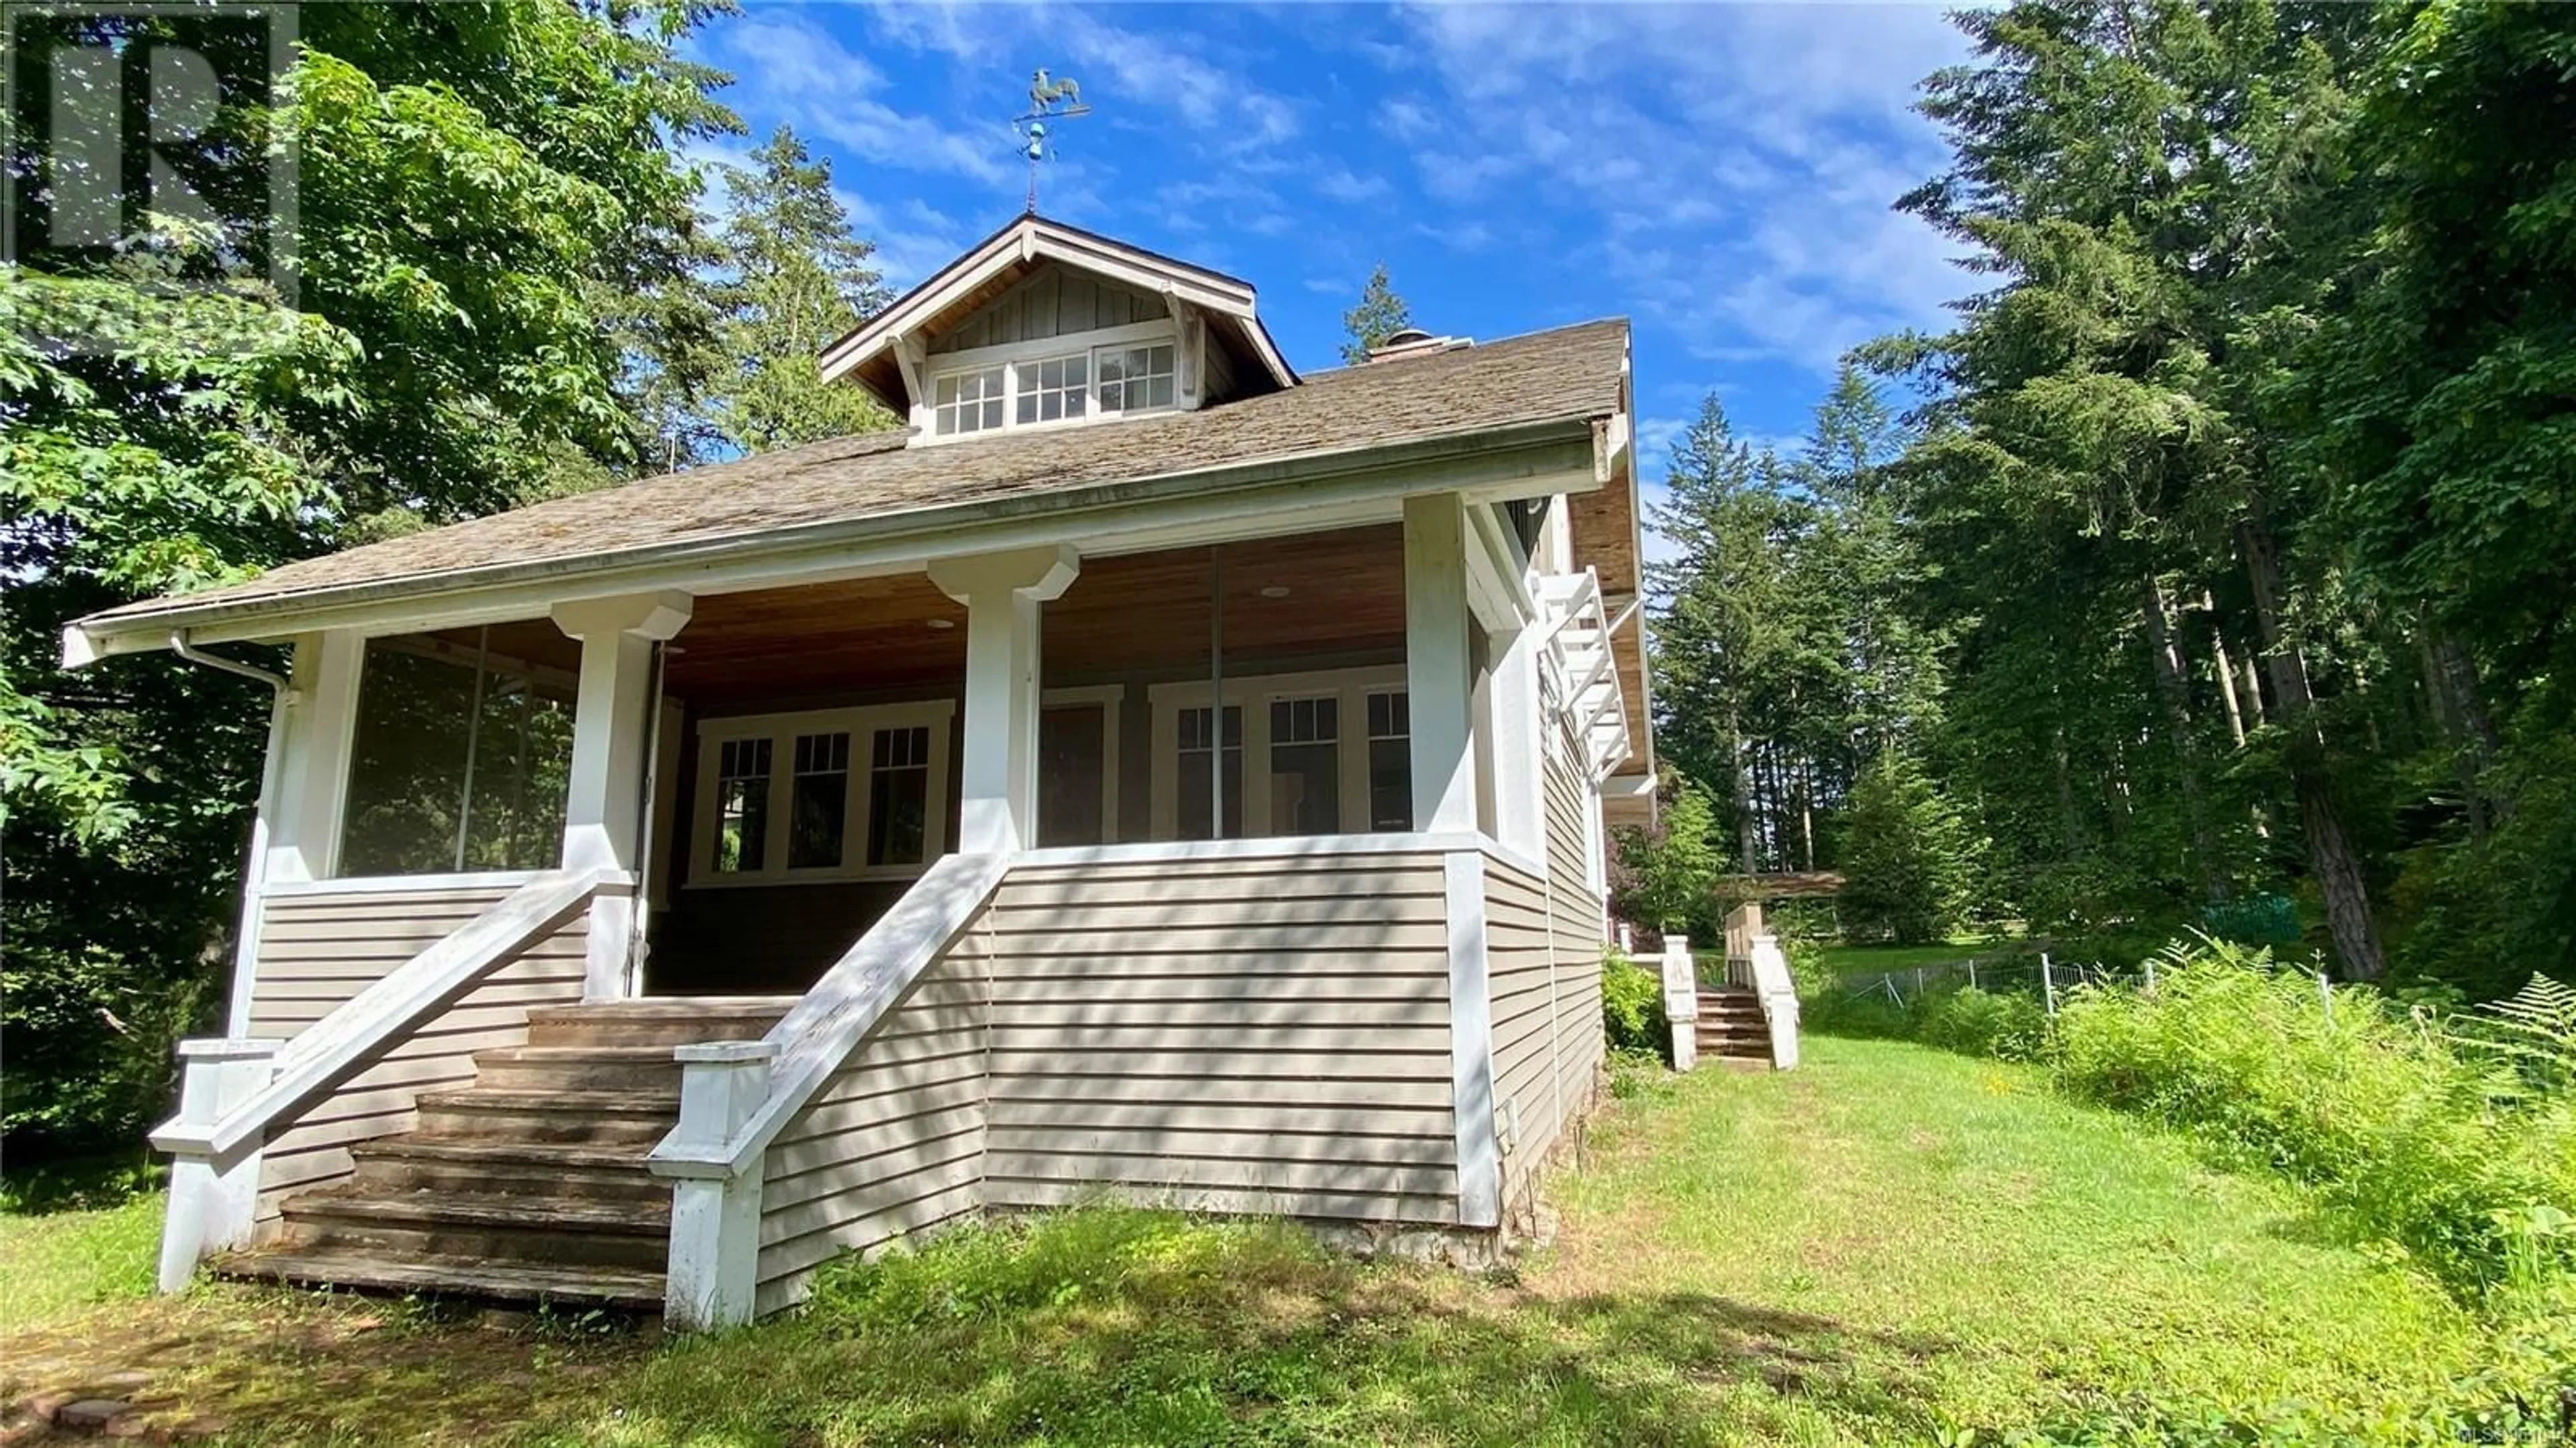 Forest view for 1305 Stalker Rd, Pender Island British Columbia V0N2M1